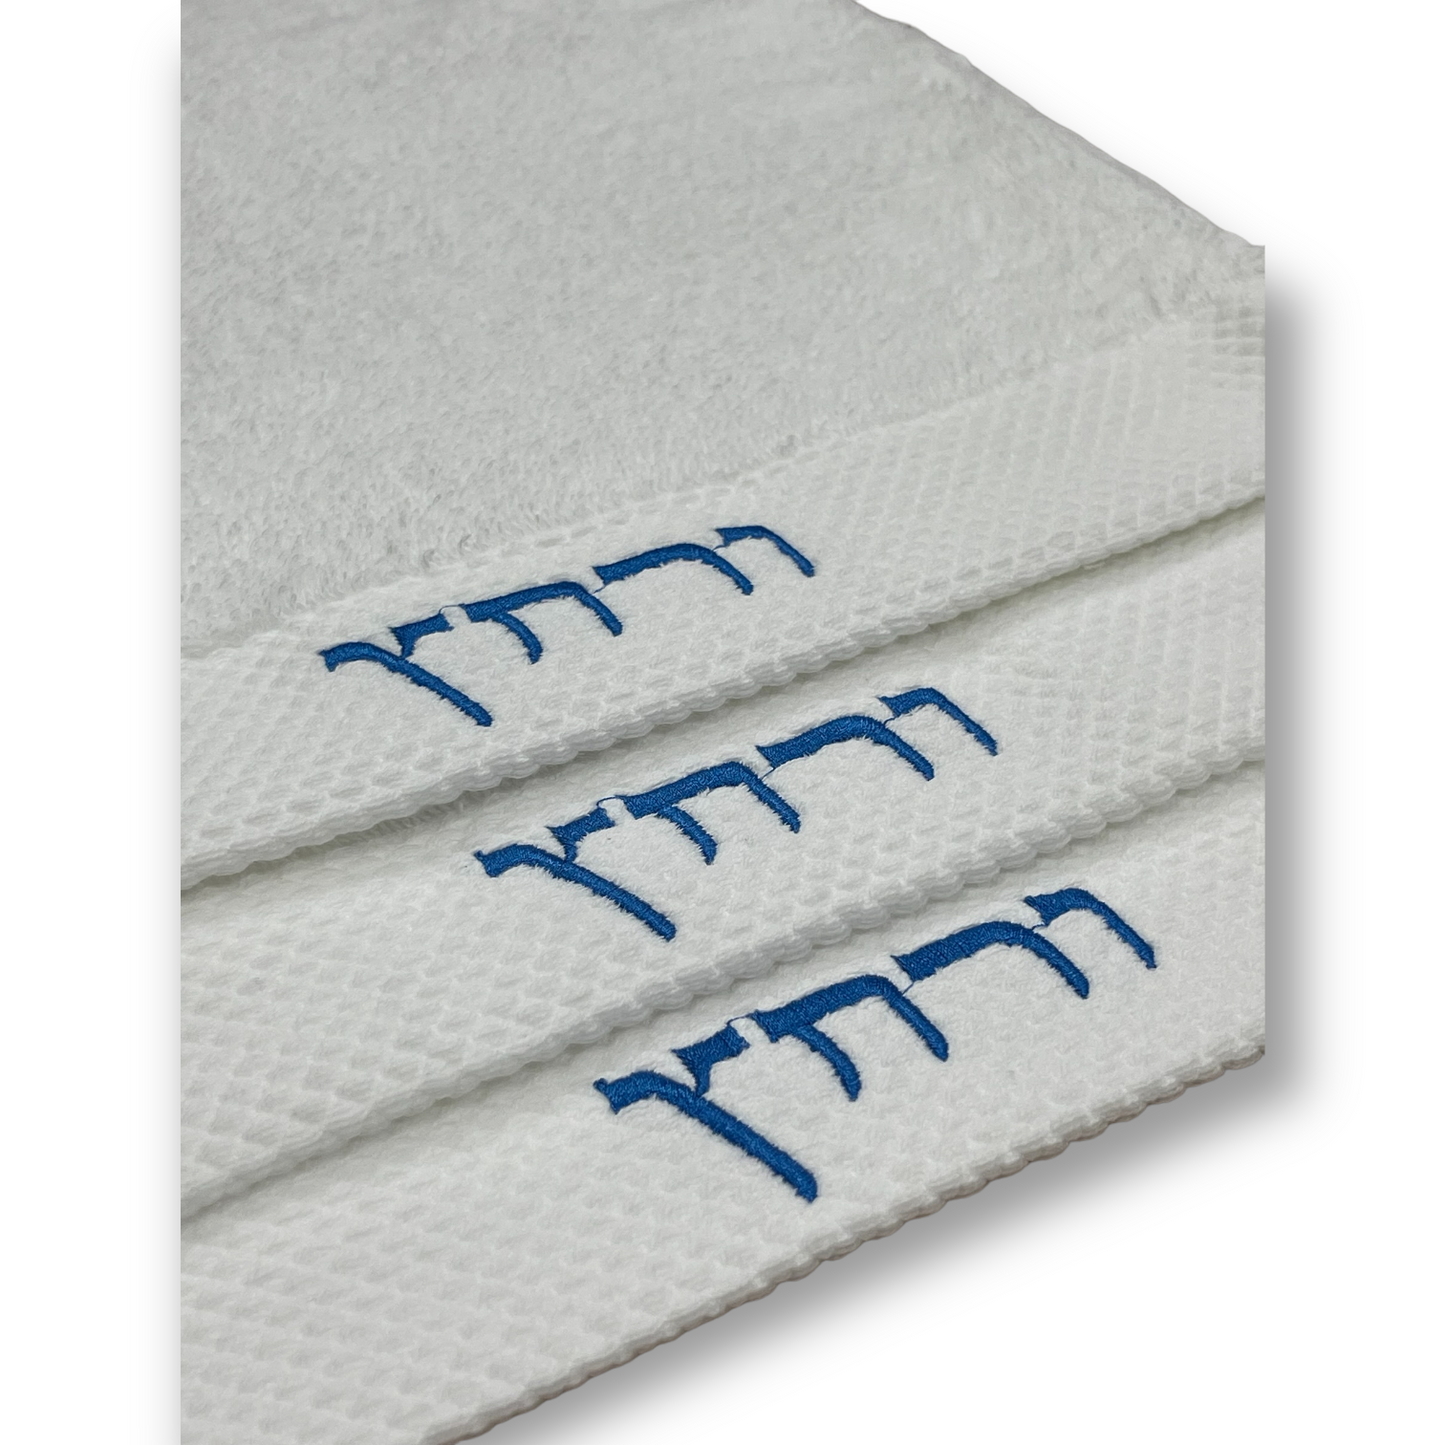 12 x 12” 3 pack ורחץ Urchaz Passover/Pesach Embroidered Hand Towels Blue.